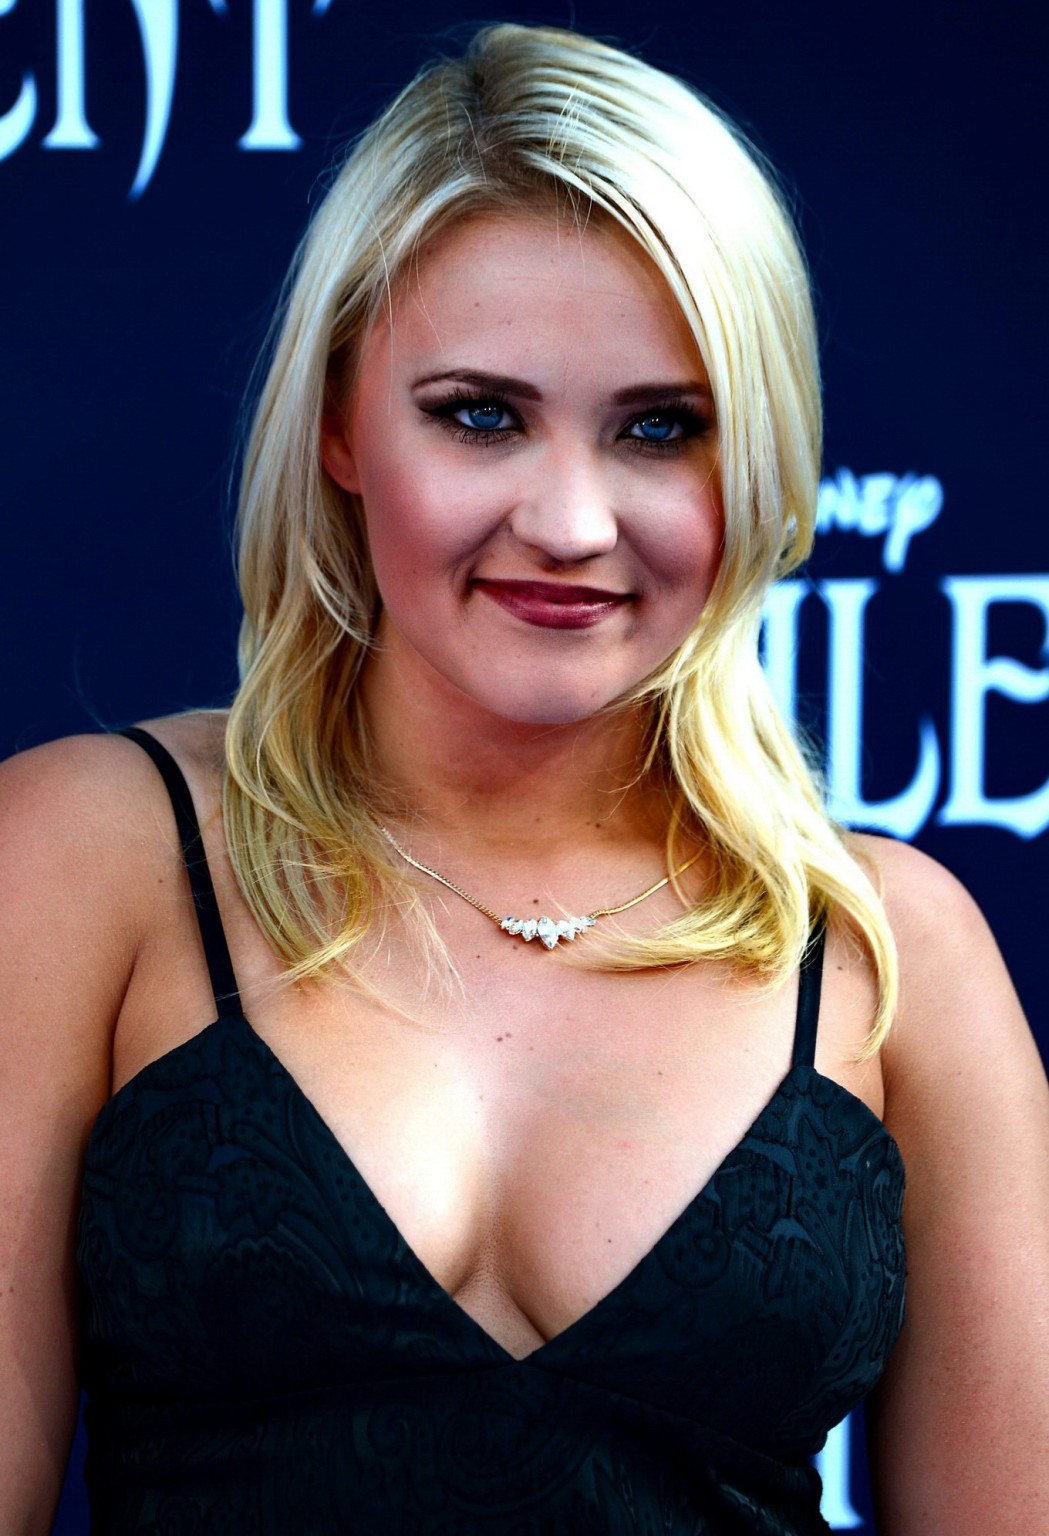 Busty Emily Osment wearing a low cut black dress at the Maleficent premiere in H #75195304